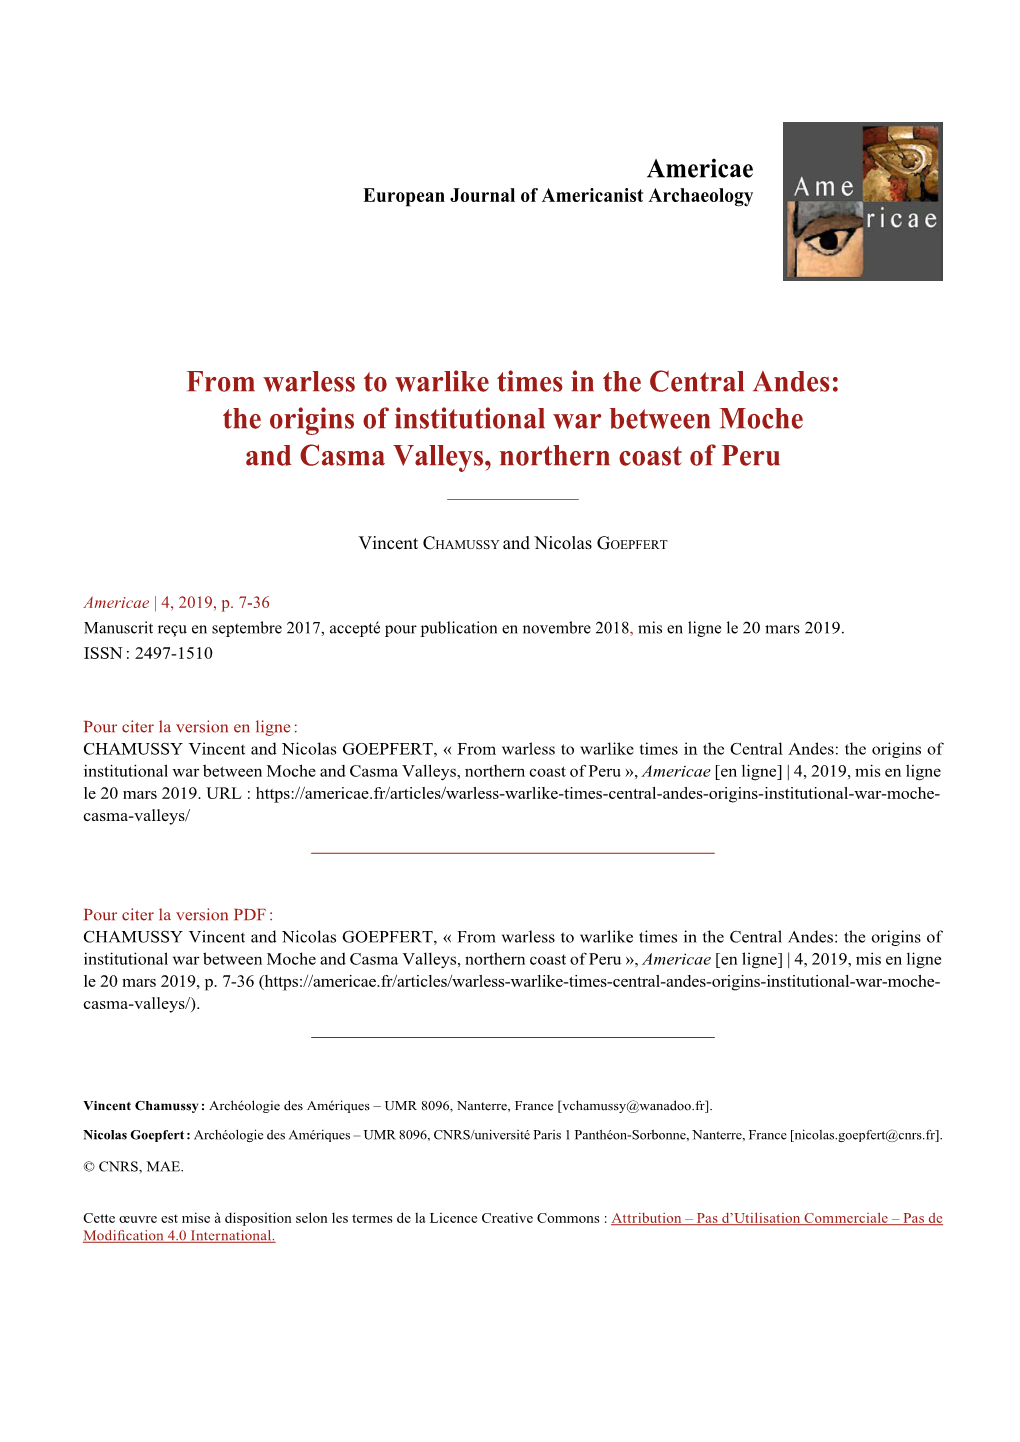 From Warless to Warlike Times in the Central Andes: the Origins of Institutional War Between Moche and Casma Valleys, Northern Coast of Peru